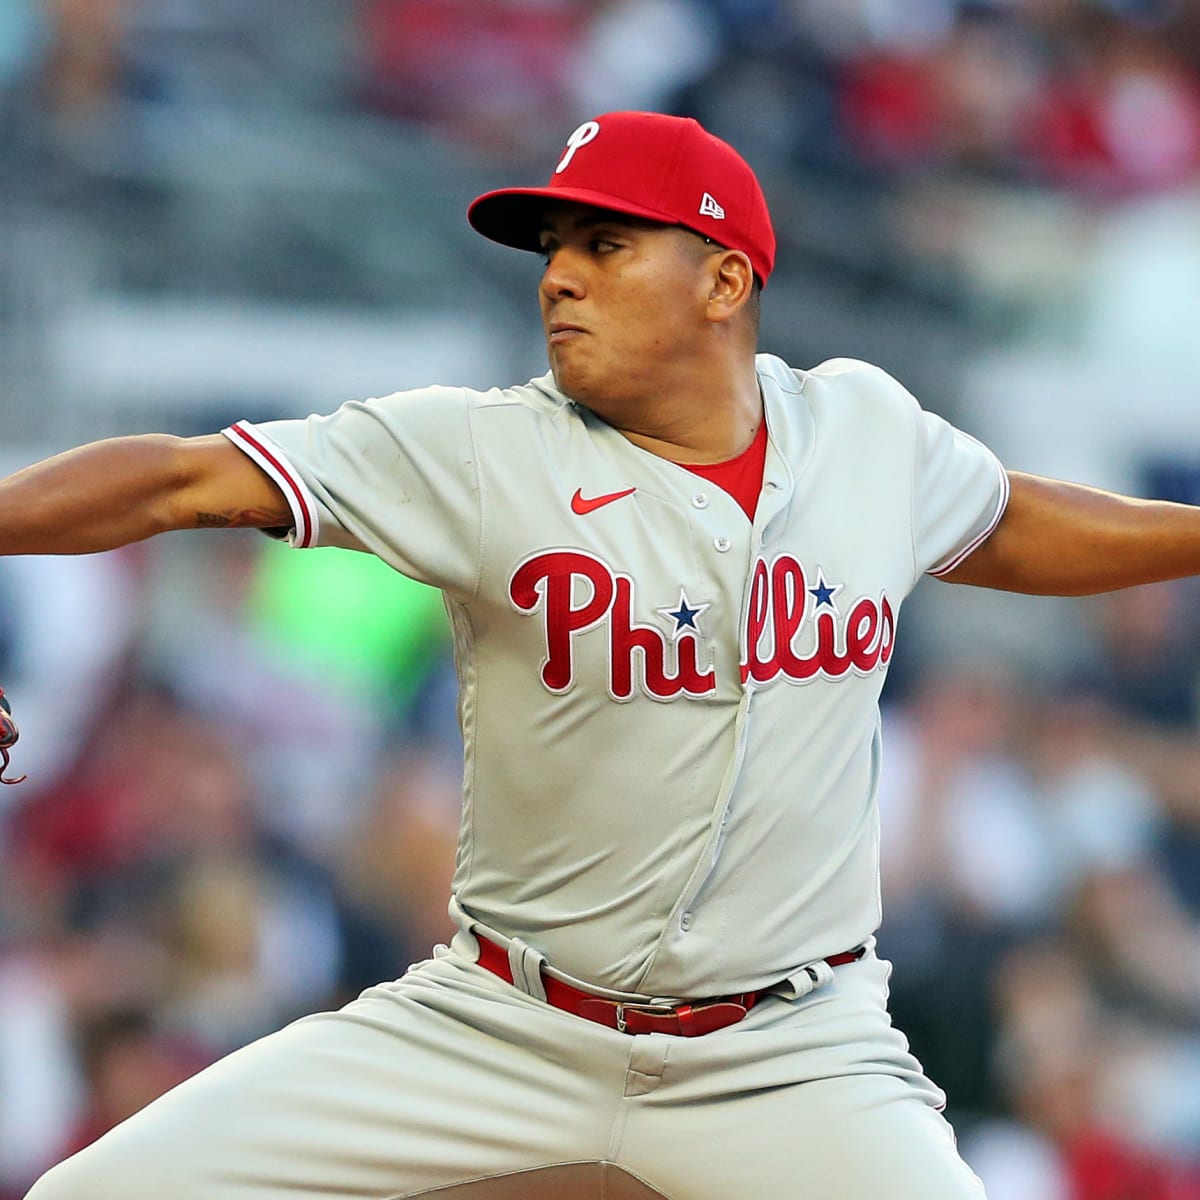 Inside the box score: NLDS Game 1 - Phillies 7, Braves 6